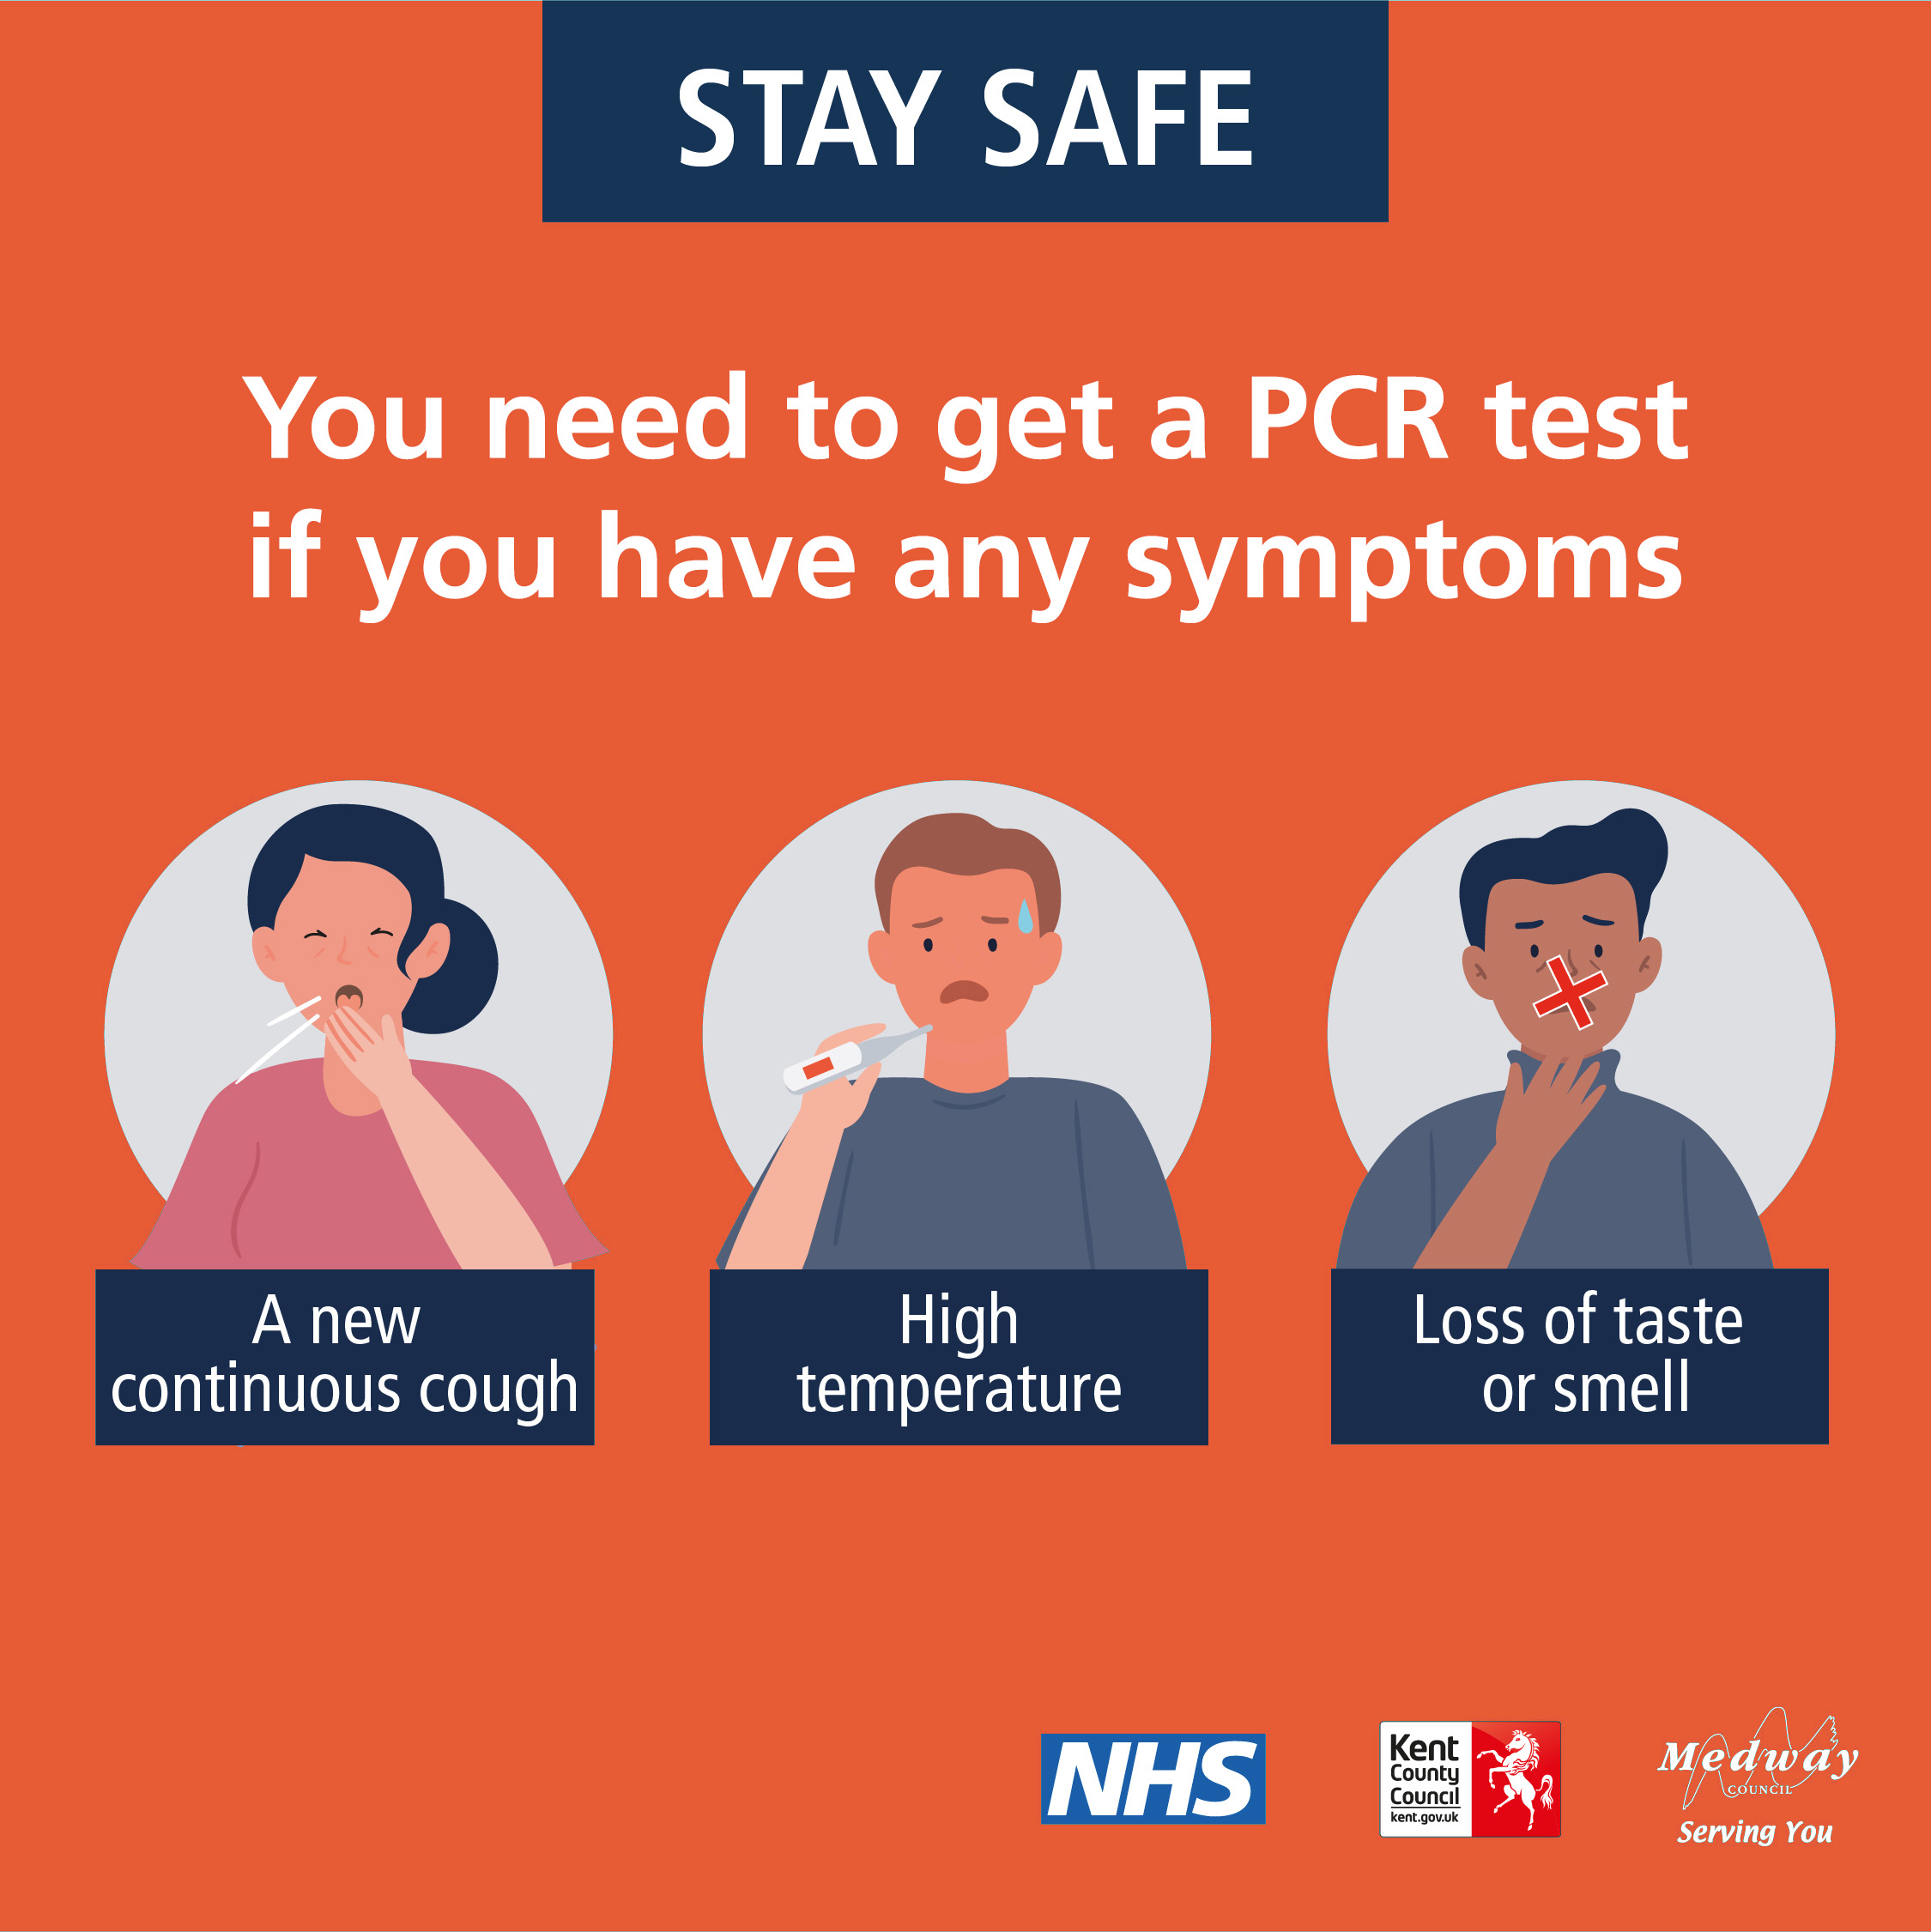 Stay Safe - You need to get a PCR test if you have any symptoms.  Symptoms:  a new continuous cough, high temperature, loss of taste or smell